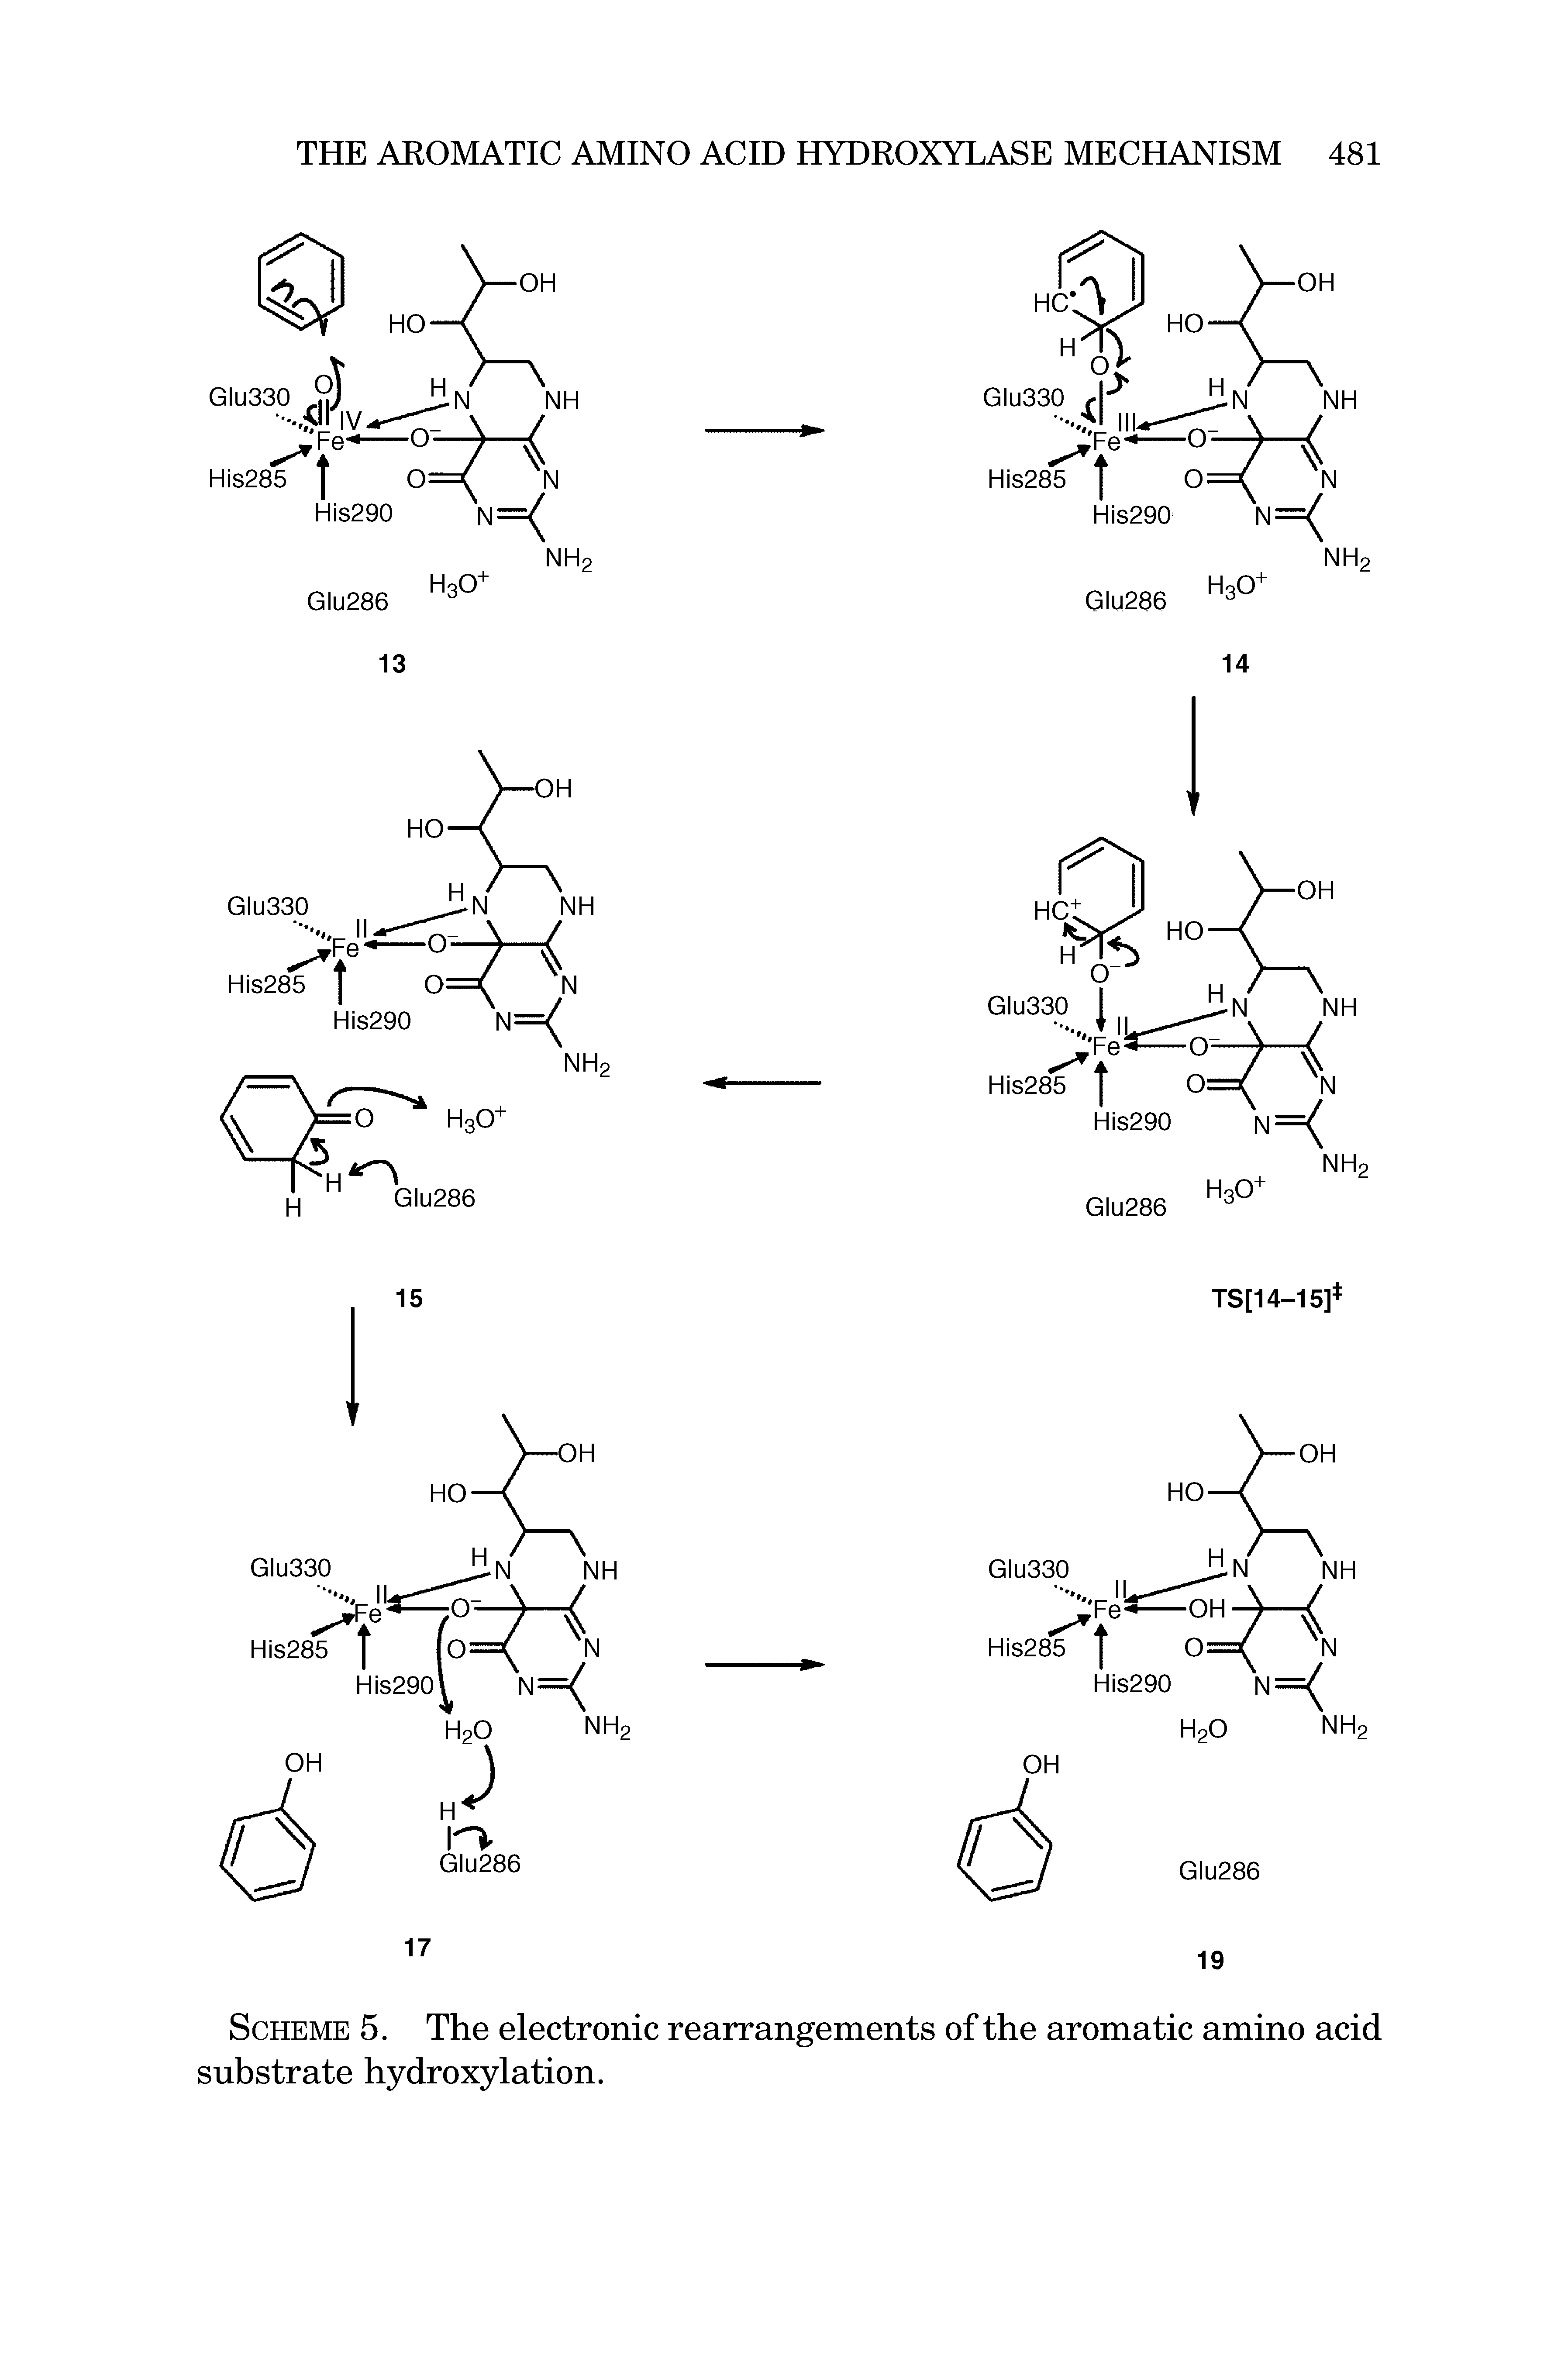 Scheme 5. The electronic rearrangements of the aromatic amino acid substrate hydroxylation.